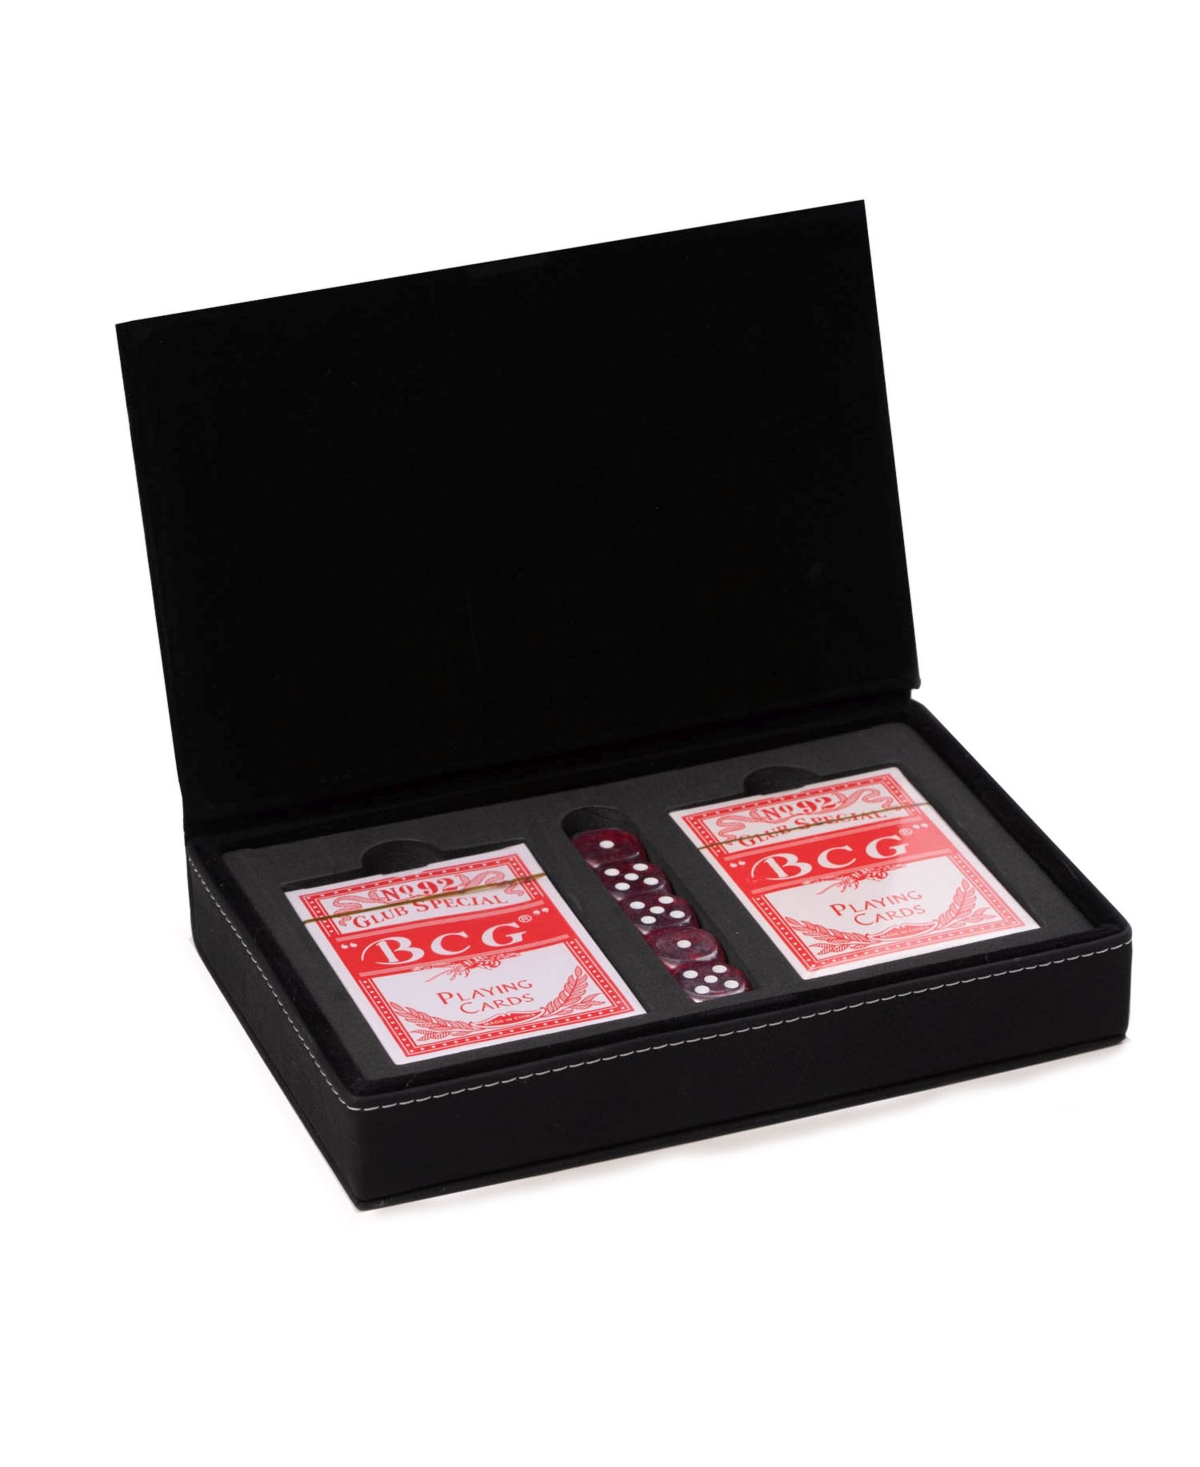 Bey-berk Game Case With Two Decks Of Playing Cards And 5 Poker Dice In Multi